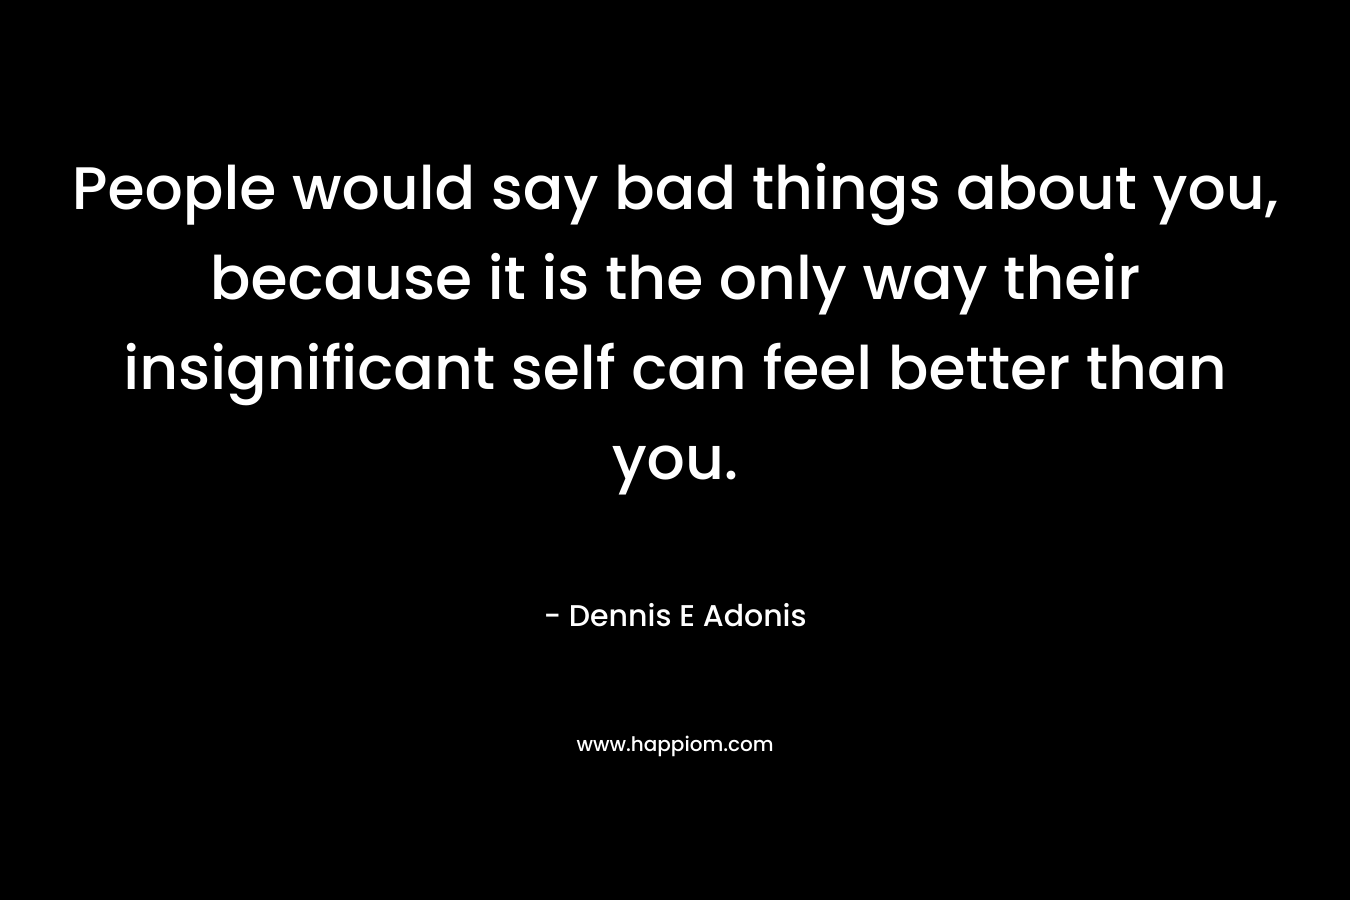 People would say bad things about you, because it is the only way their insignificant self can feel better than you. – Dennis E Adonis